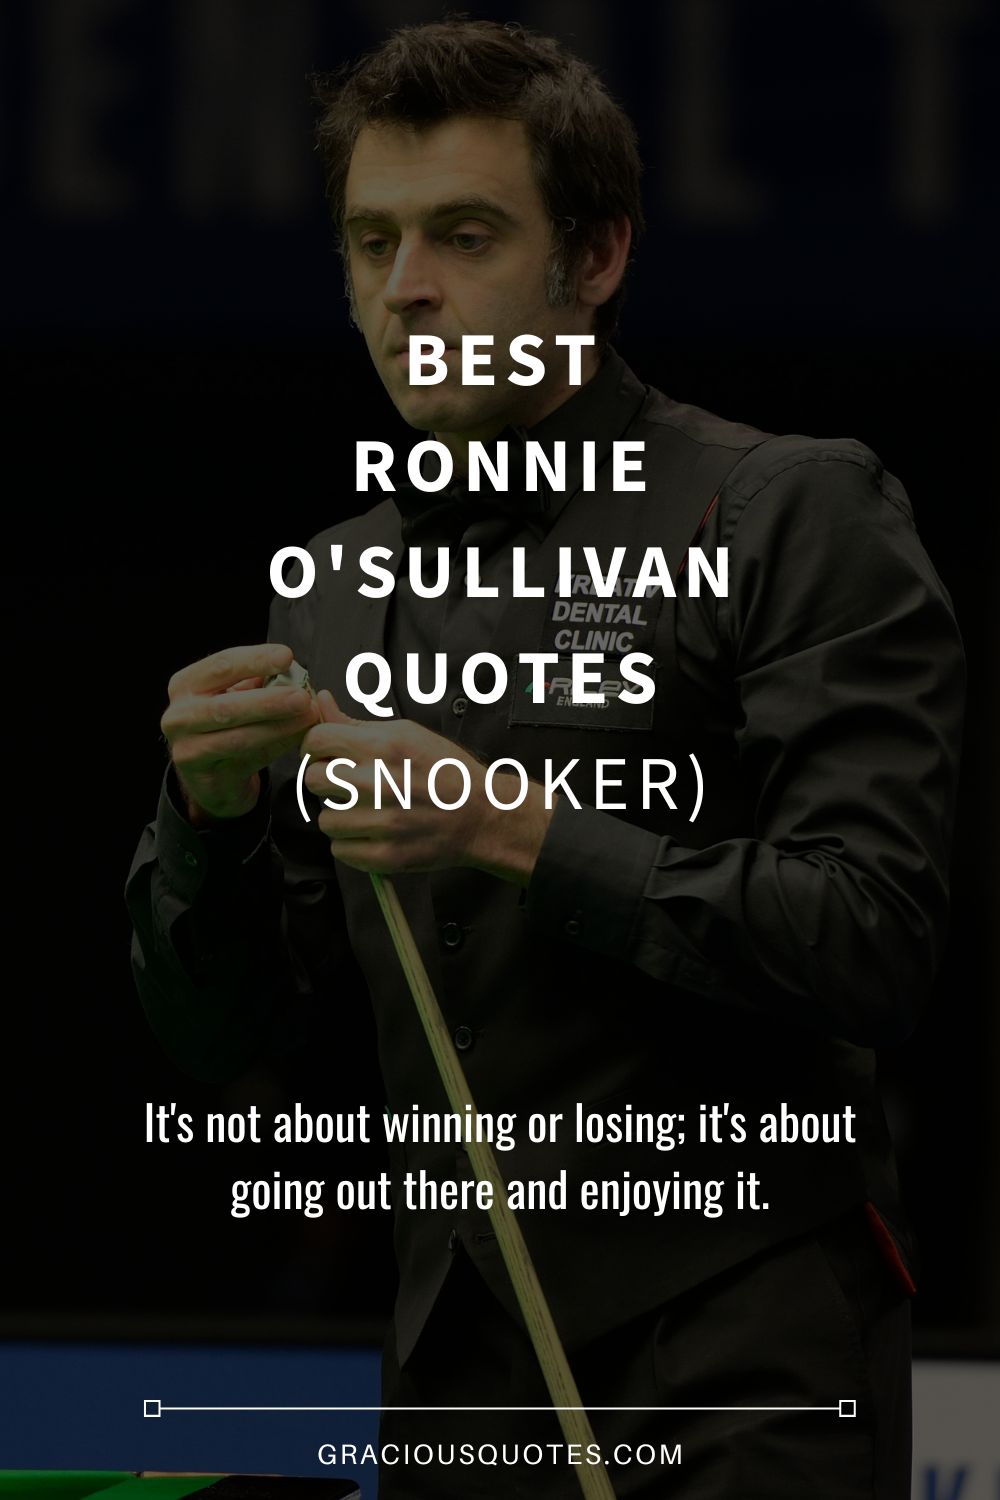 Best Ronnie O'Sullivan Quotes (SNOOKER) - Gracious Quots